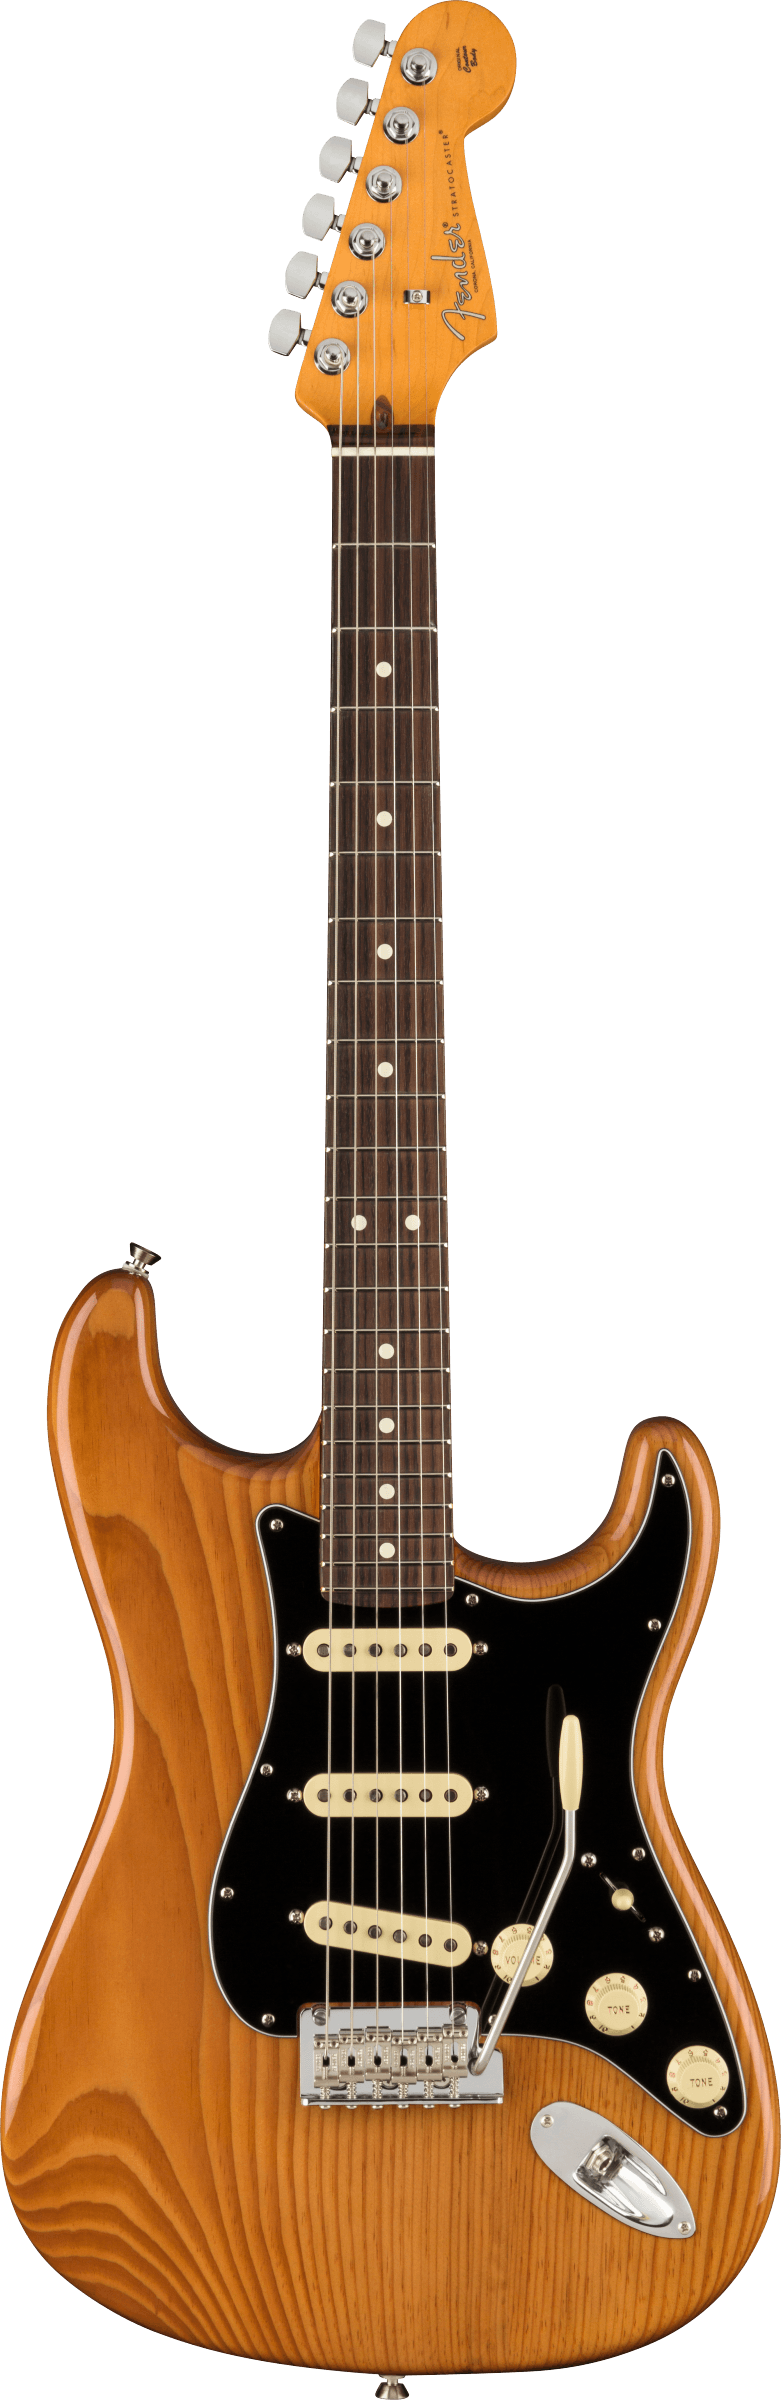 Fender Stratocaster RW Electric guitar in Roasted Pine Tone Shop Guitars DFW